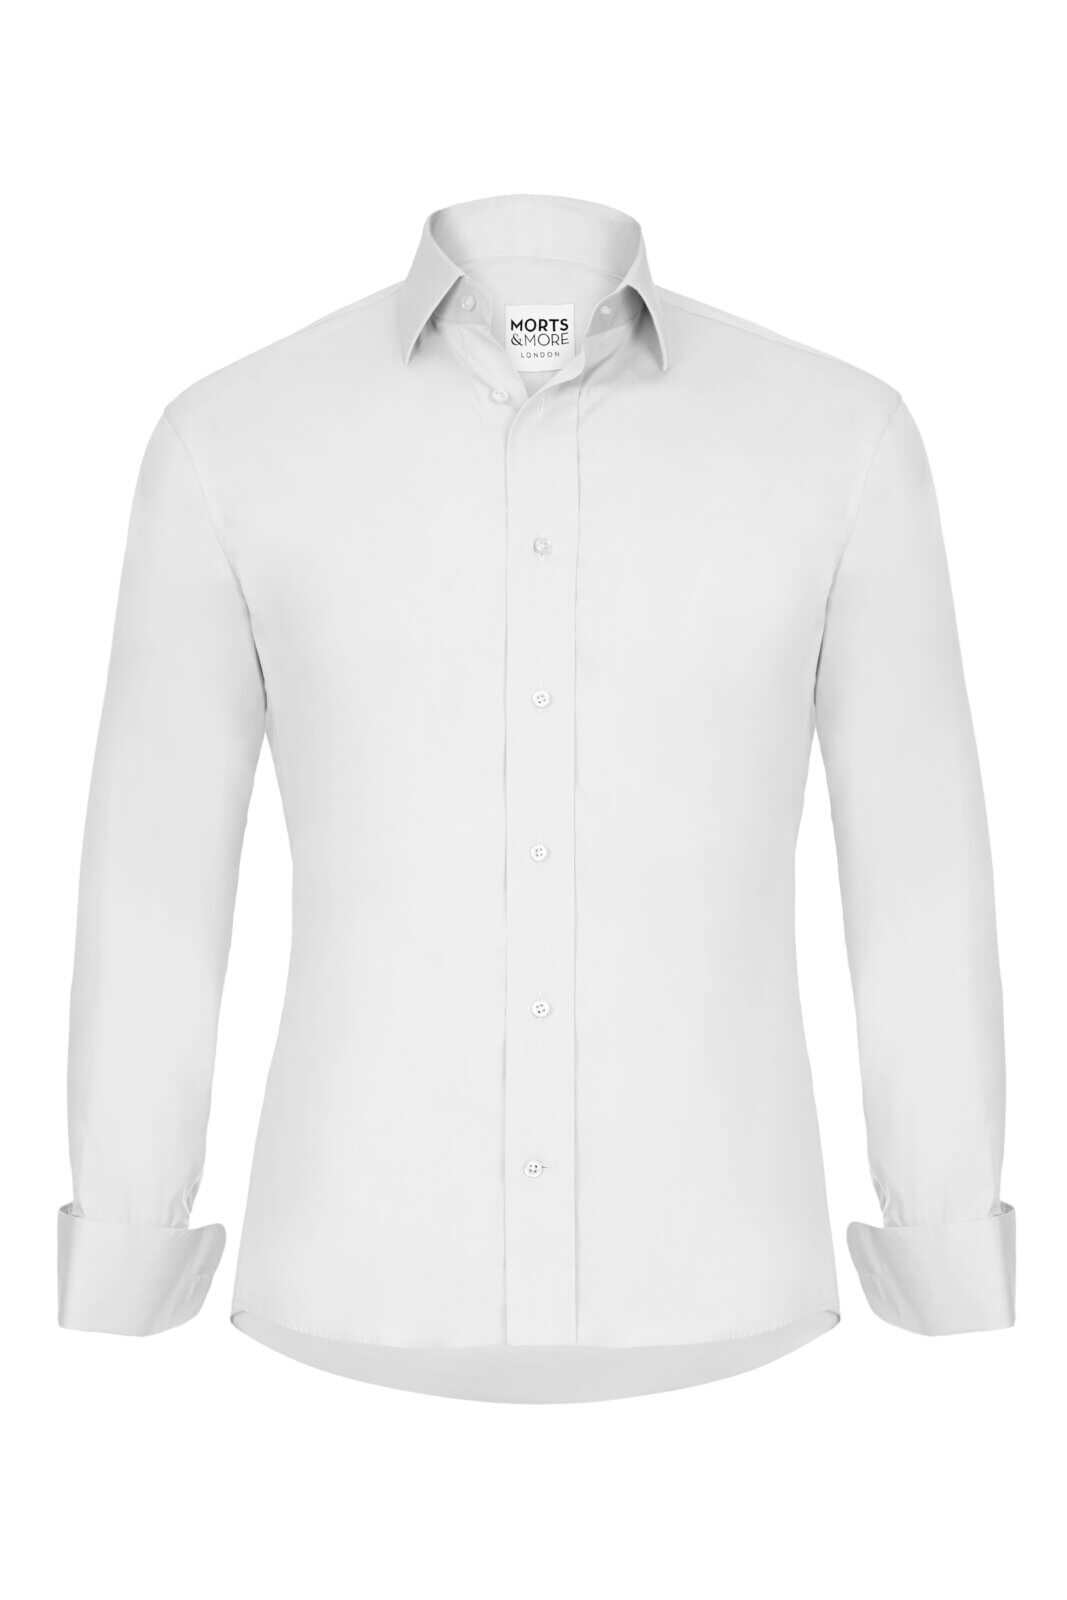 Bespoke Shirt | Stylist | Accurate | Cost Effective